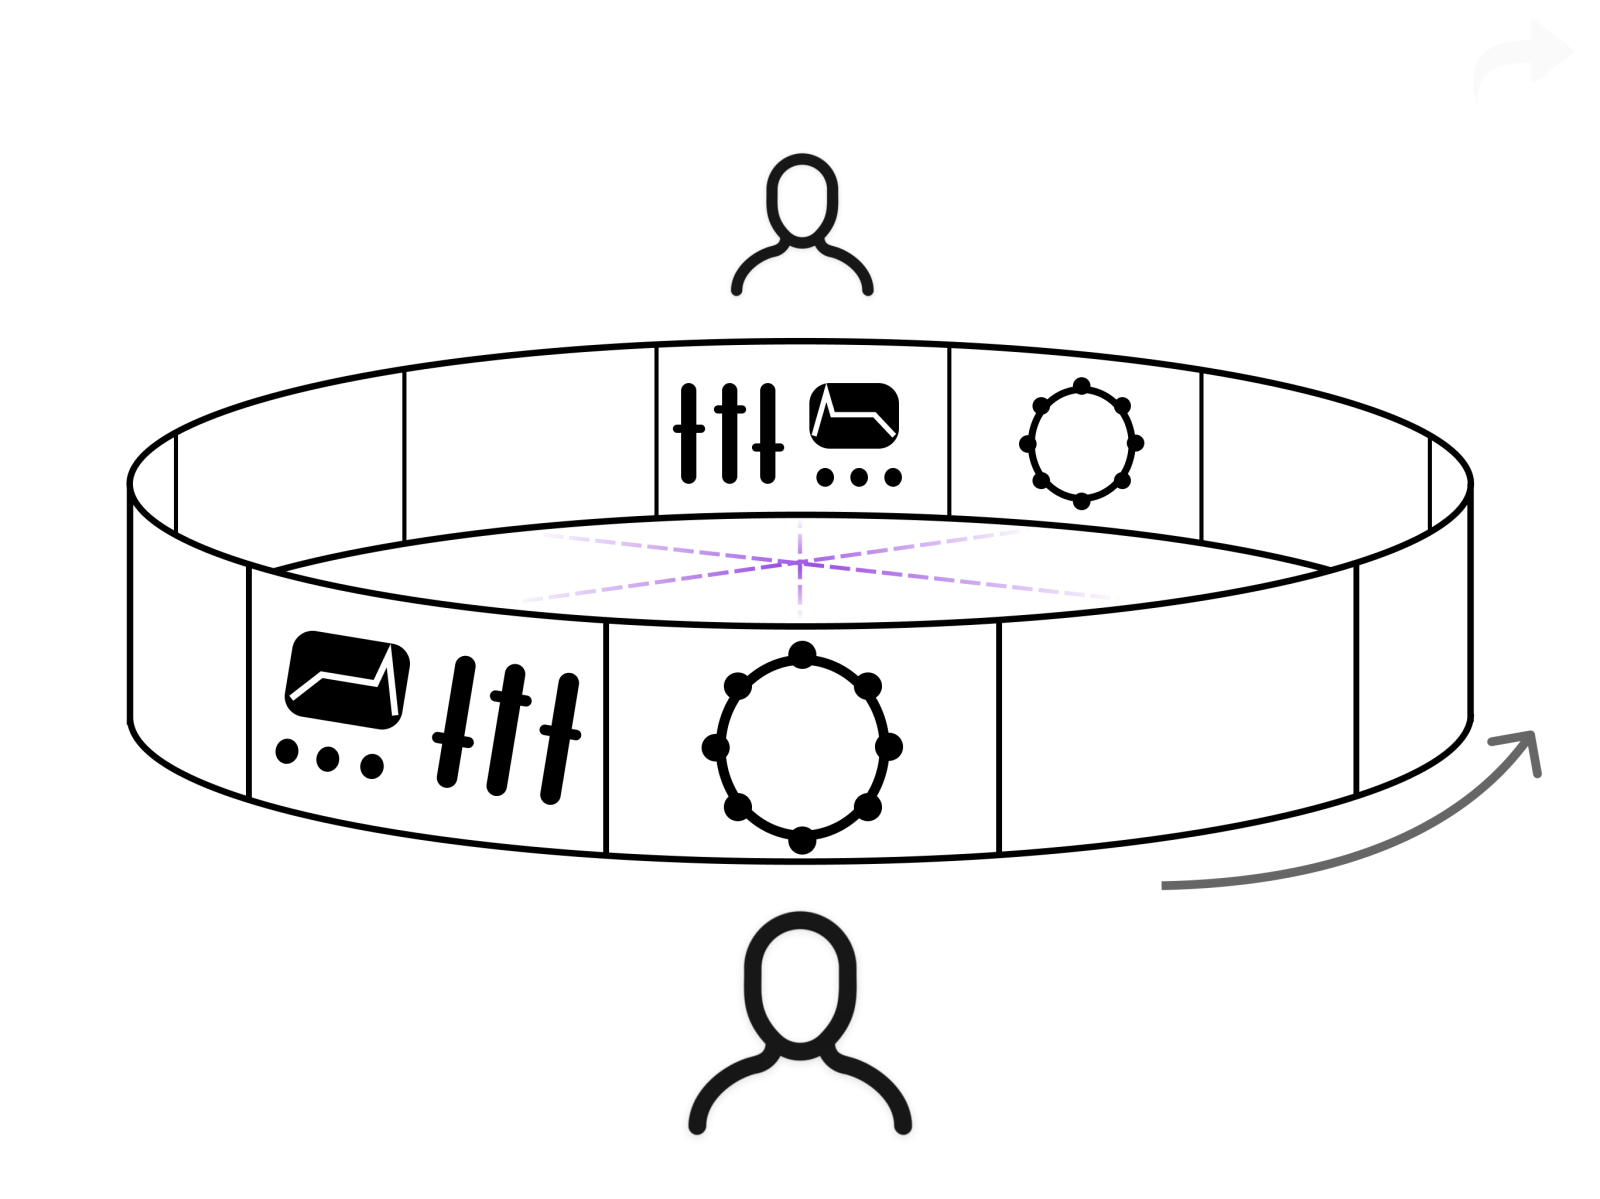 Computer drawn sketch showing different screens of app carousel-style, with two people on either side